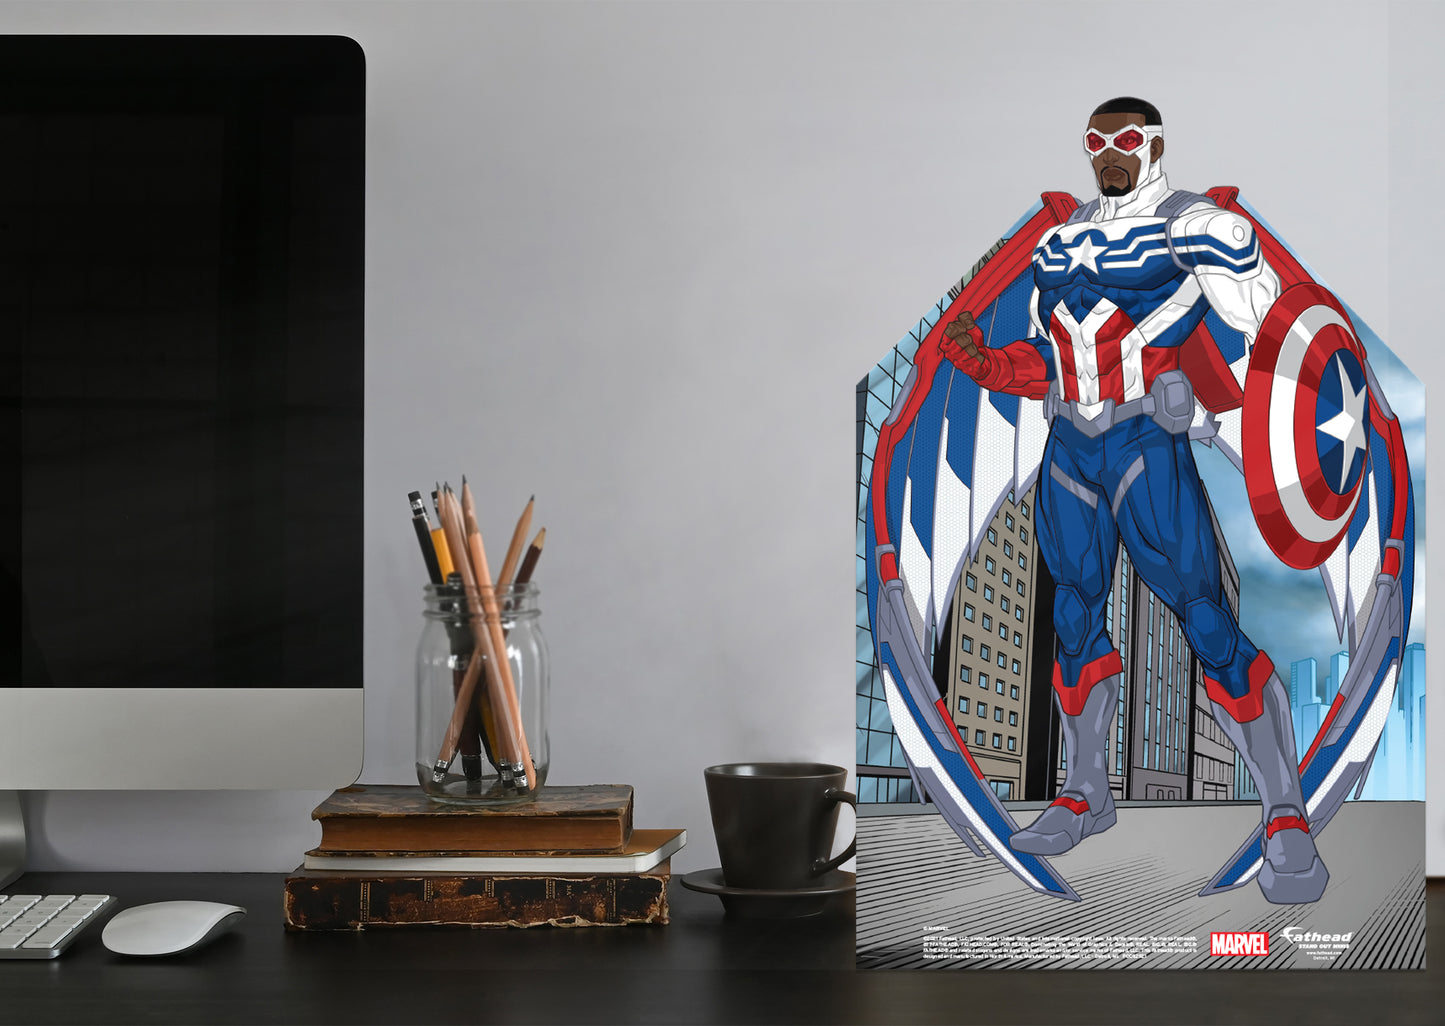 Avengers: CAPT AMERICA SAM WILSON Mini   Cardstock Cutout  - Officially Licensed Marvel    Stand Out